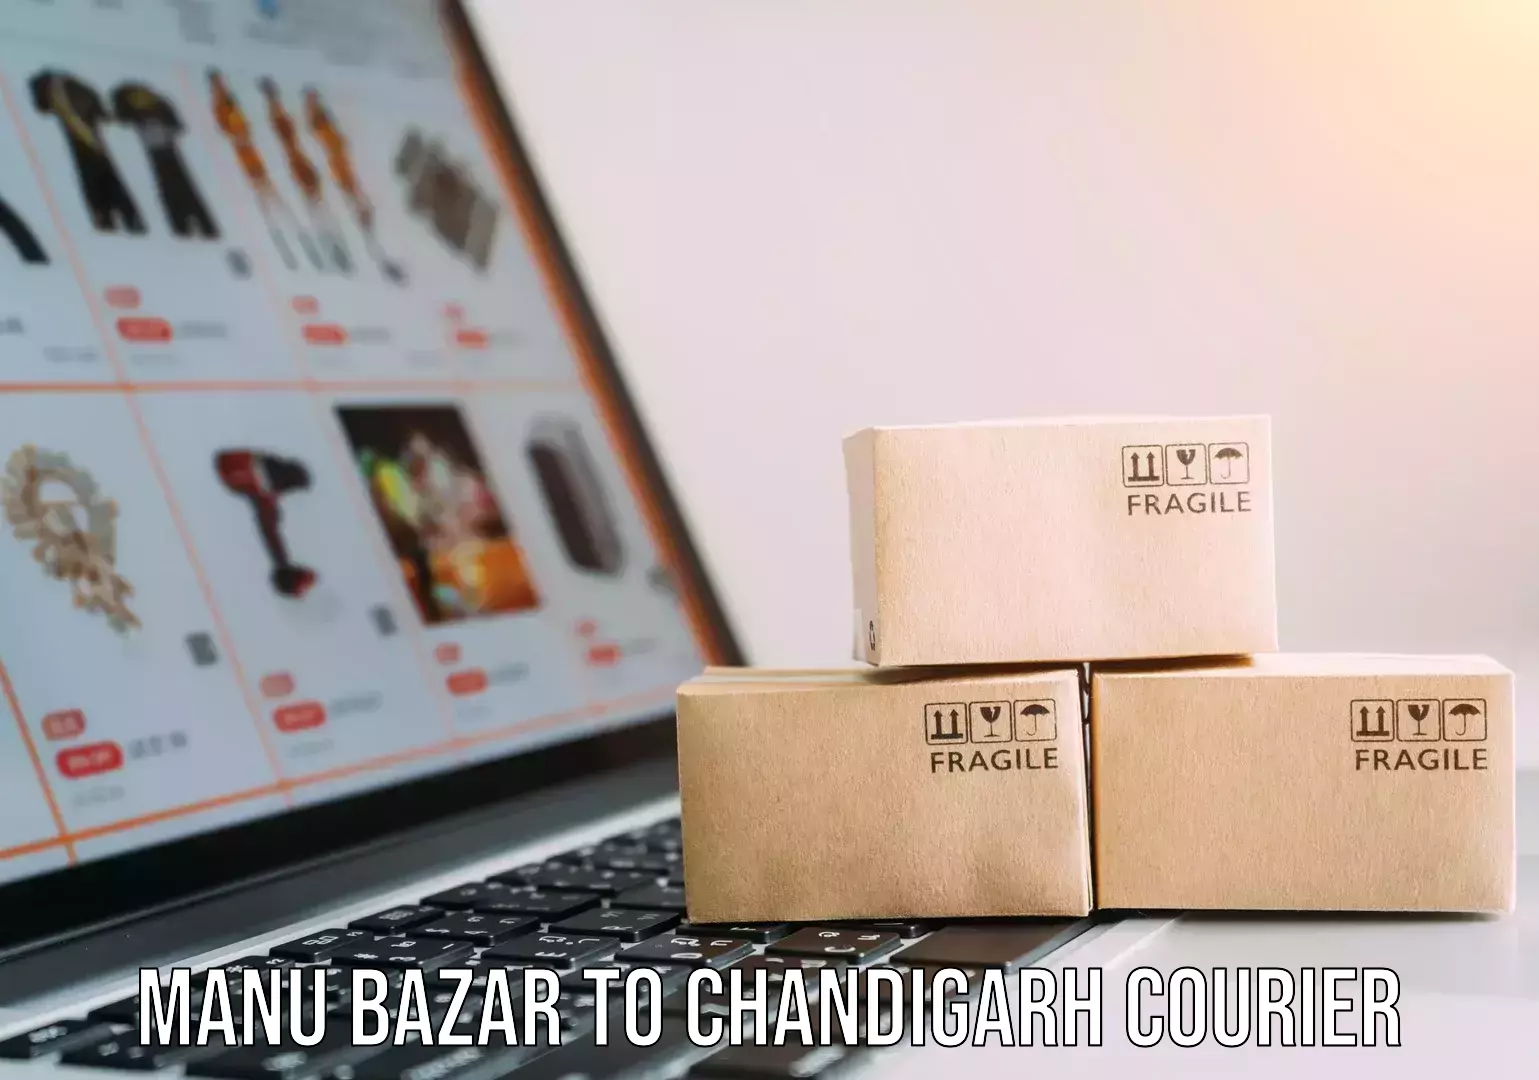 Express delivery capabilities Manu Bazar to Chandigarh